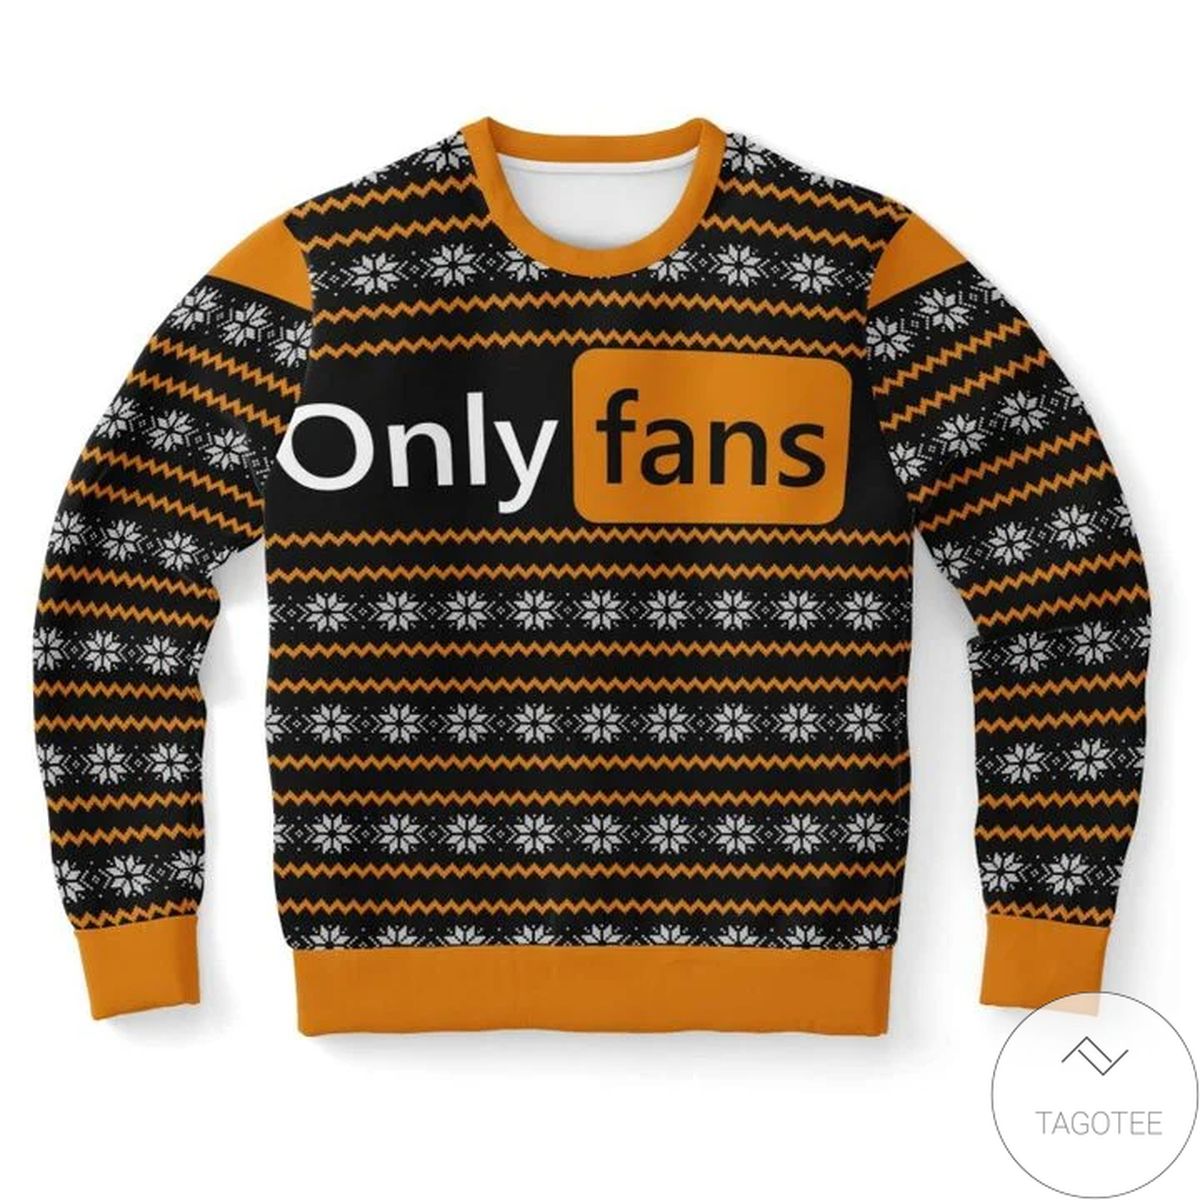 P*rnhub Style Onlyfans Ugly Christmas Sweater